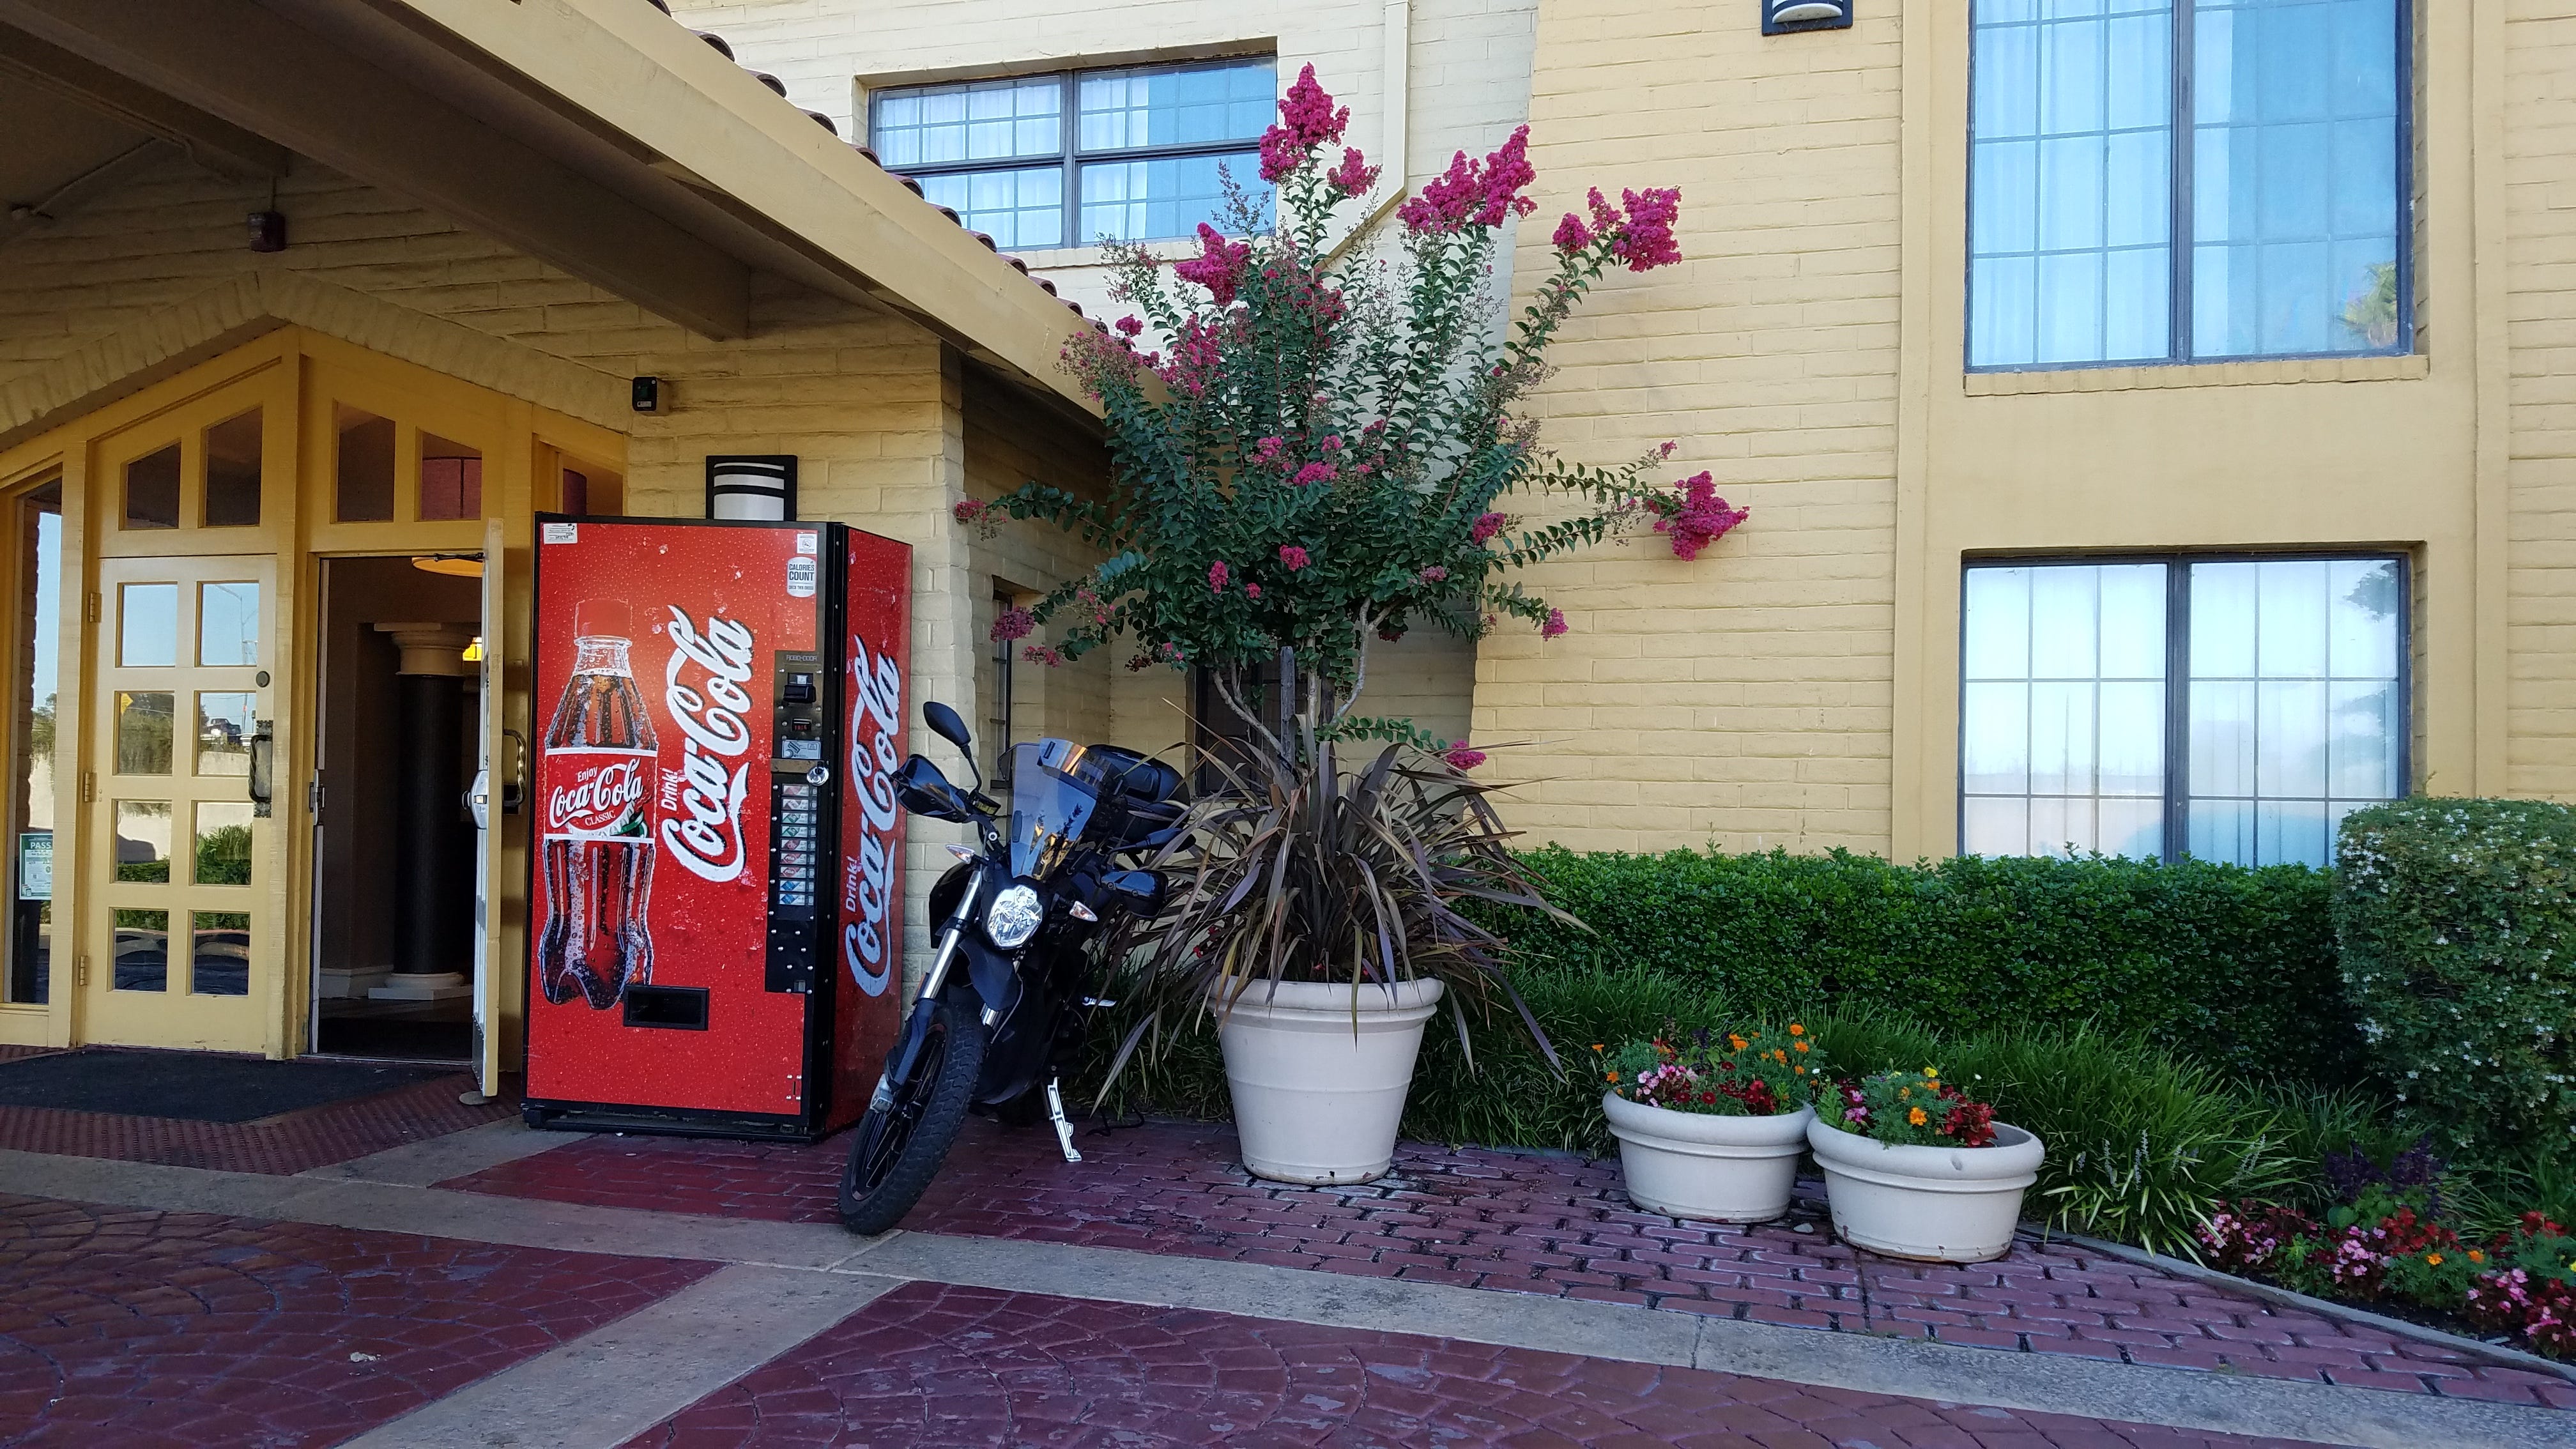 Zero DSR sits parked outside a yellow, brick hotel entrance, between the red Coca Cola soda machine and a giant planter overflowing with long blade-like leaves and a tall, flowering plant with pink flowers. An extension cord snakes from the motorcycle to the outlet where the soda machine is plugged in.